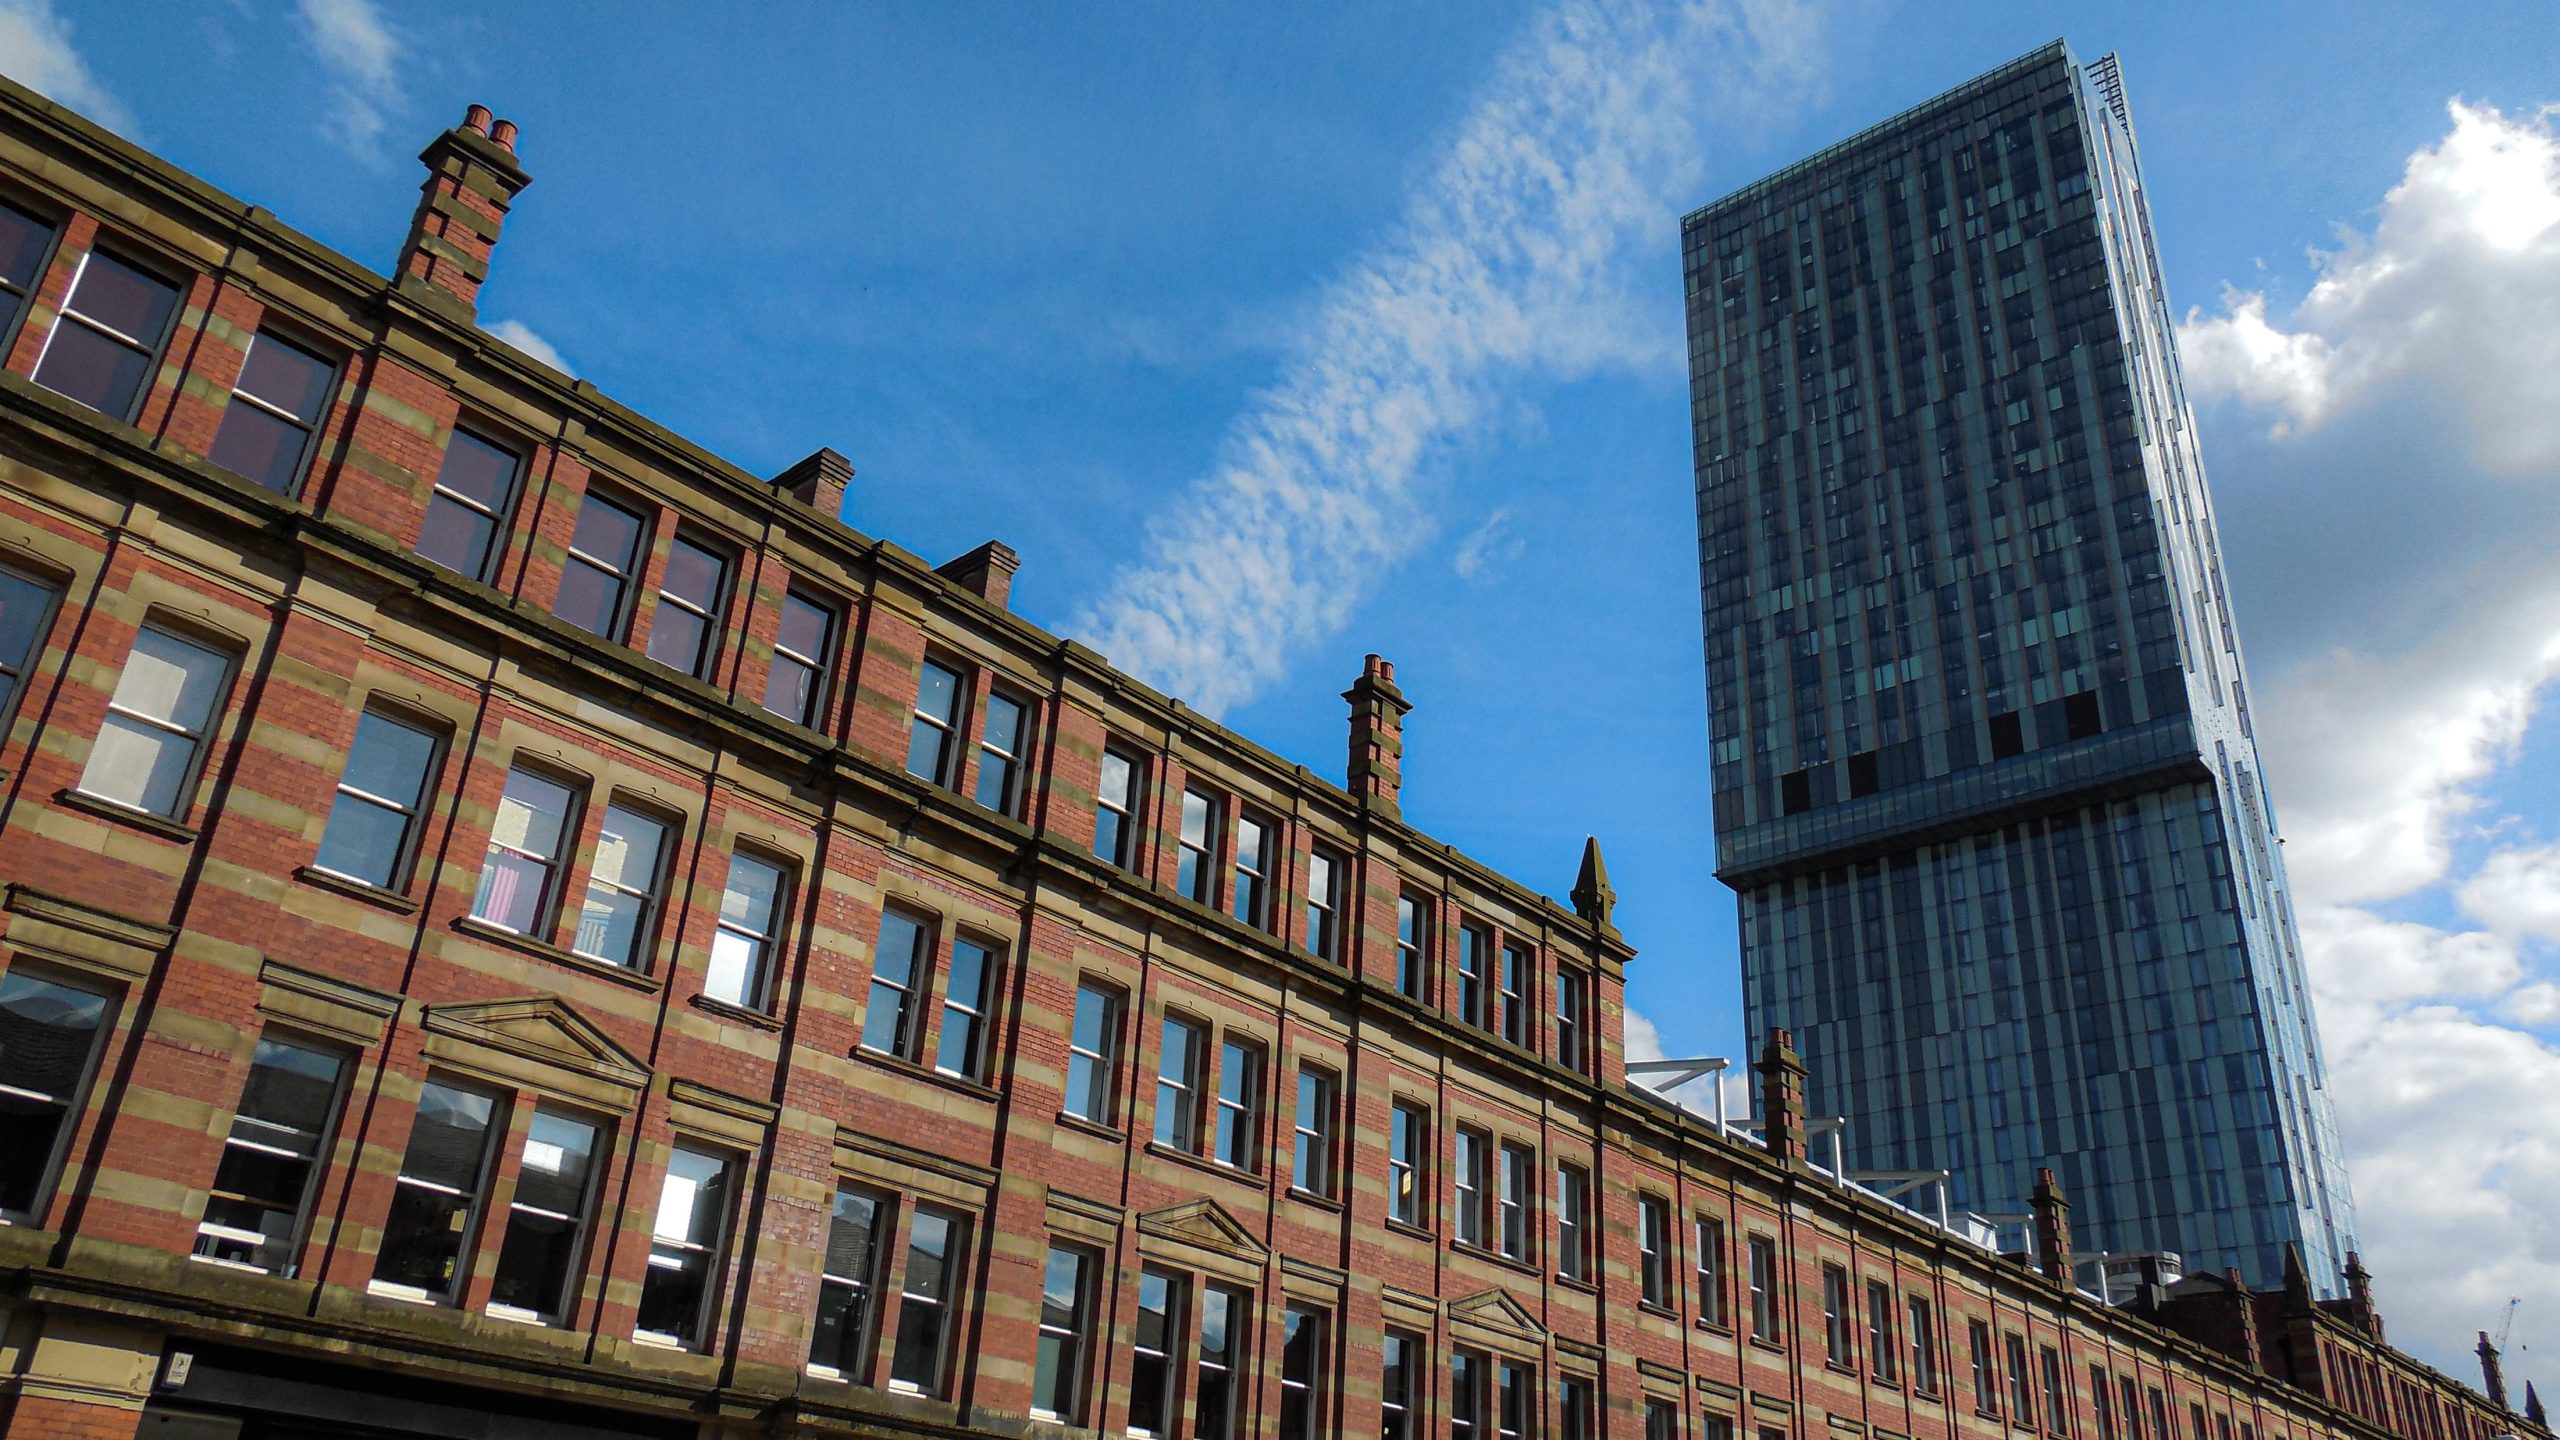 Deansgate with the iconic hilton hotel in Manchester